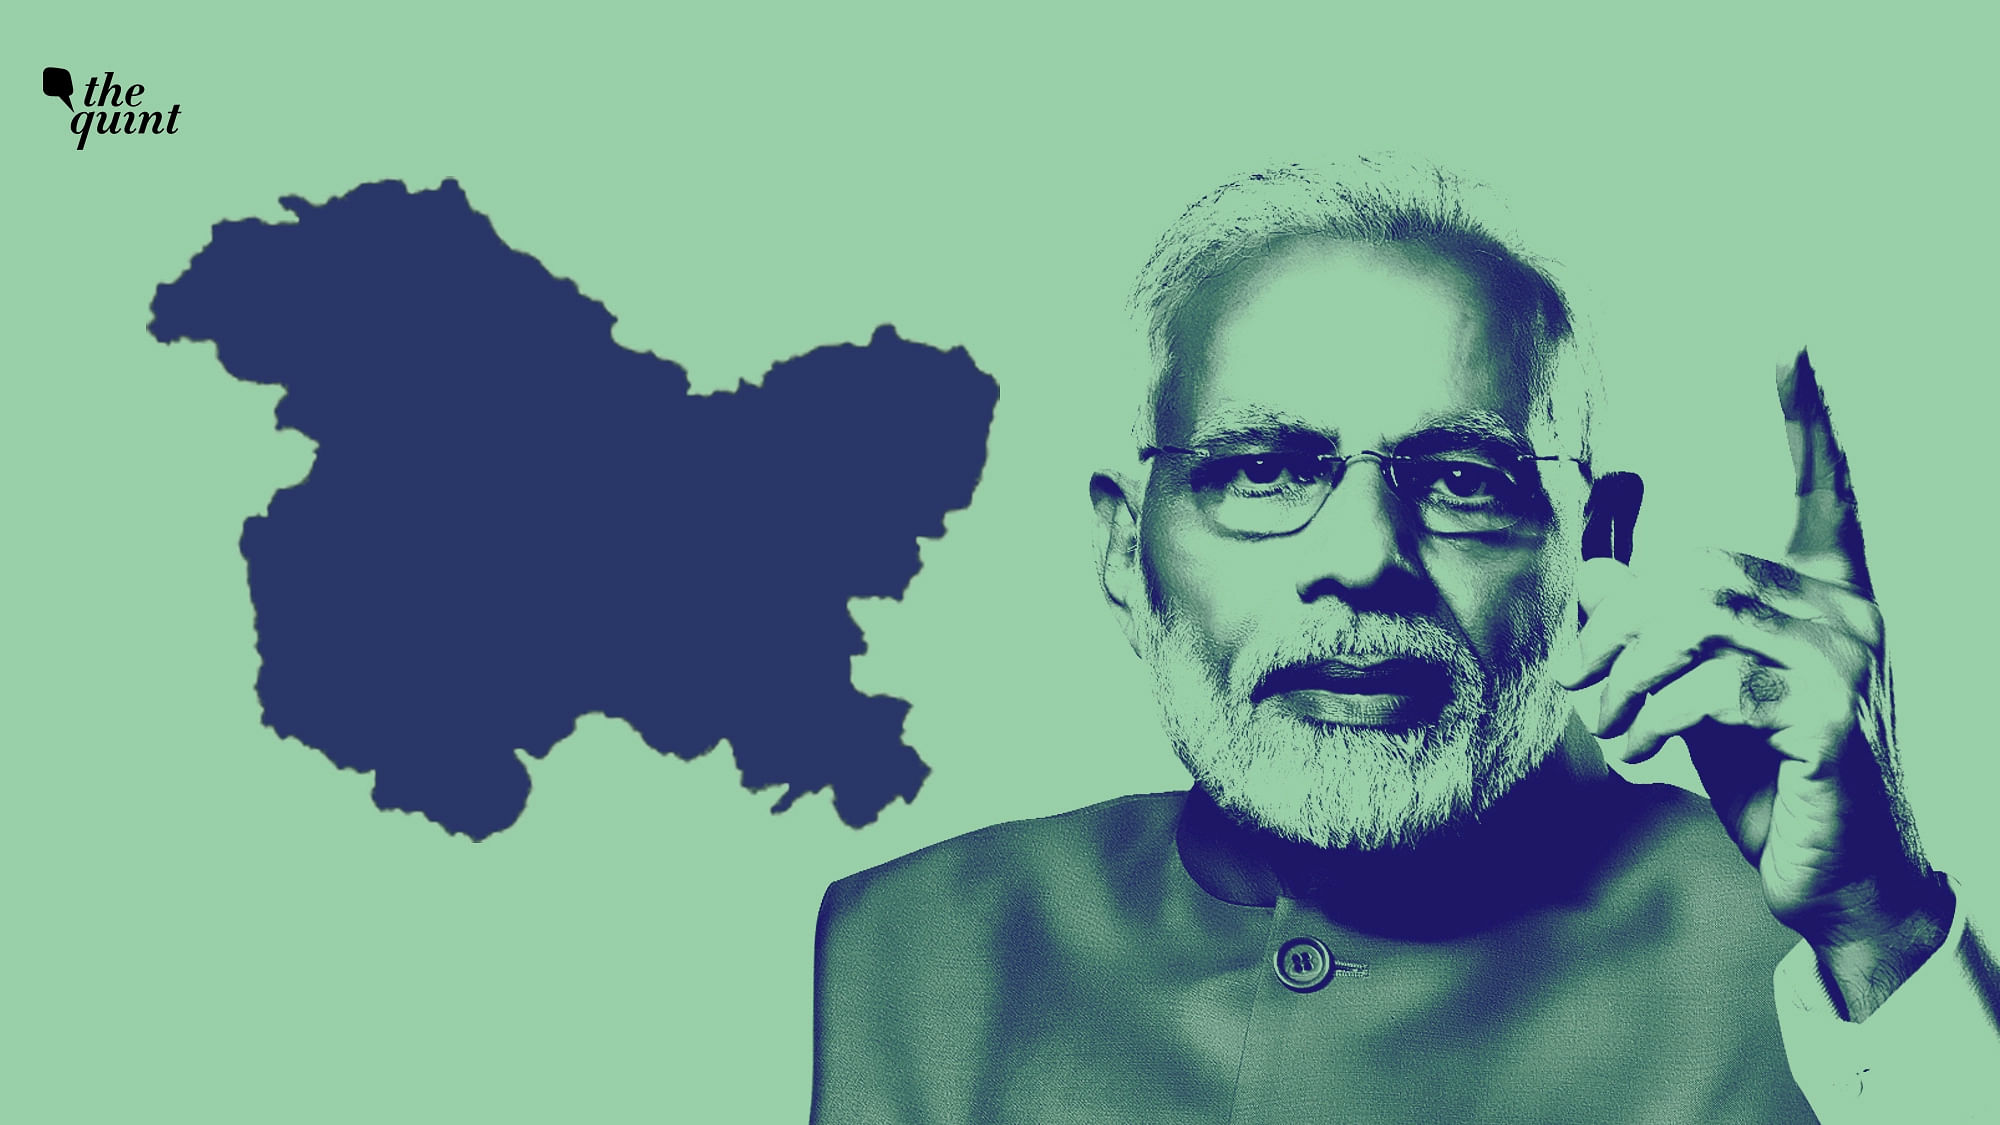 Image of PM Modi and map of J&amp;K used for representational purposes.